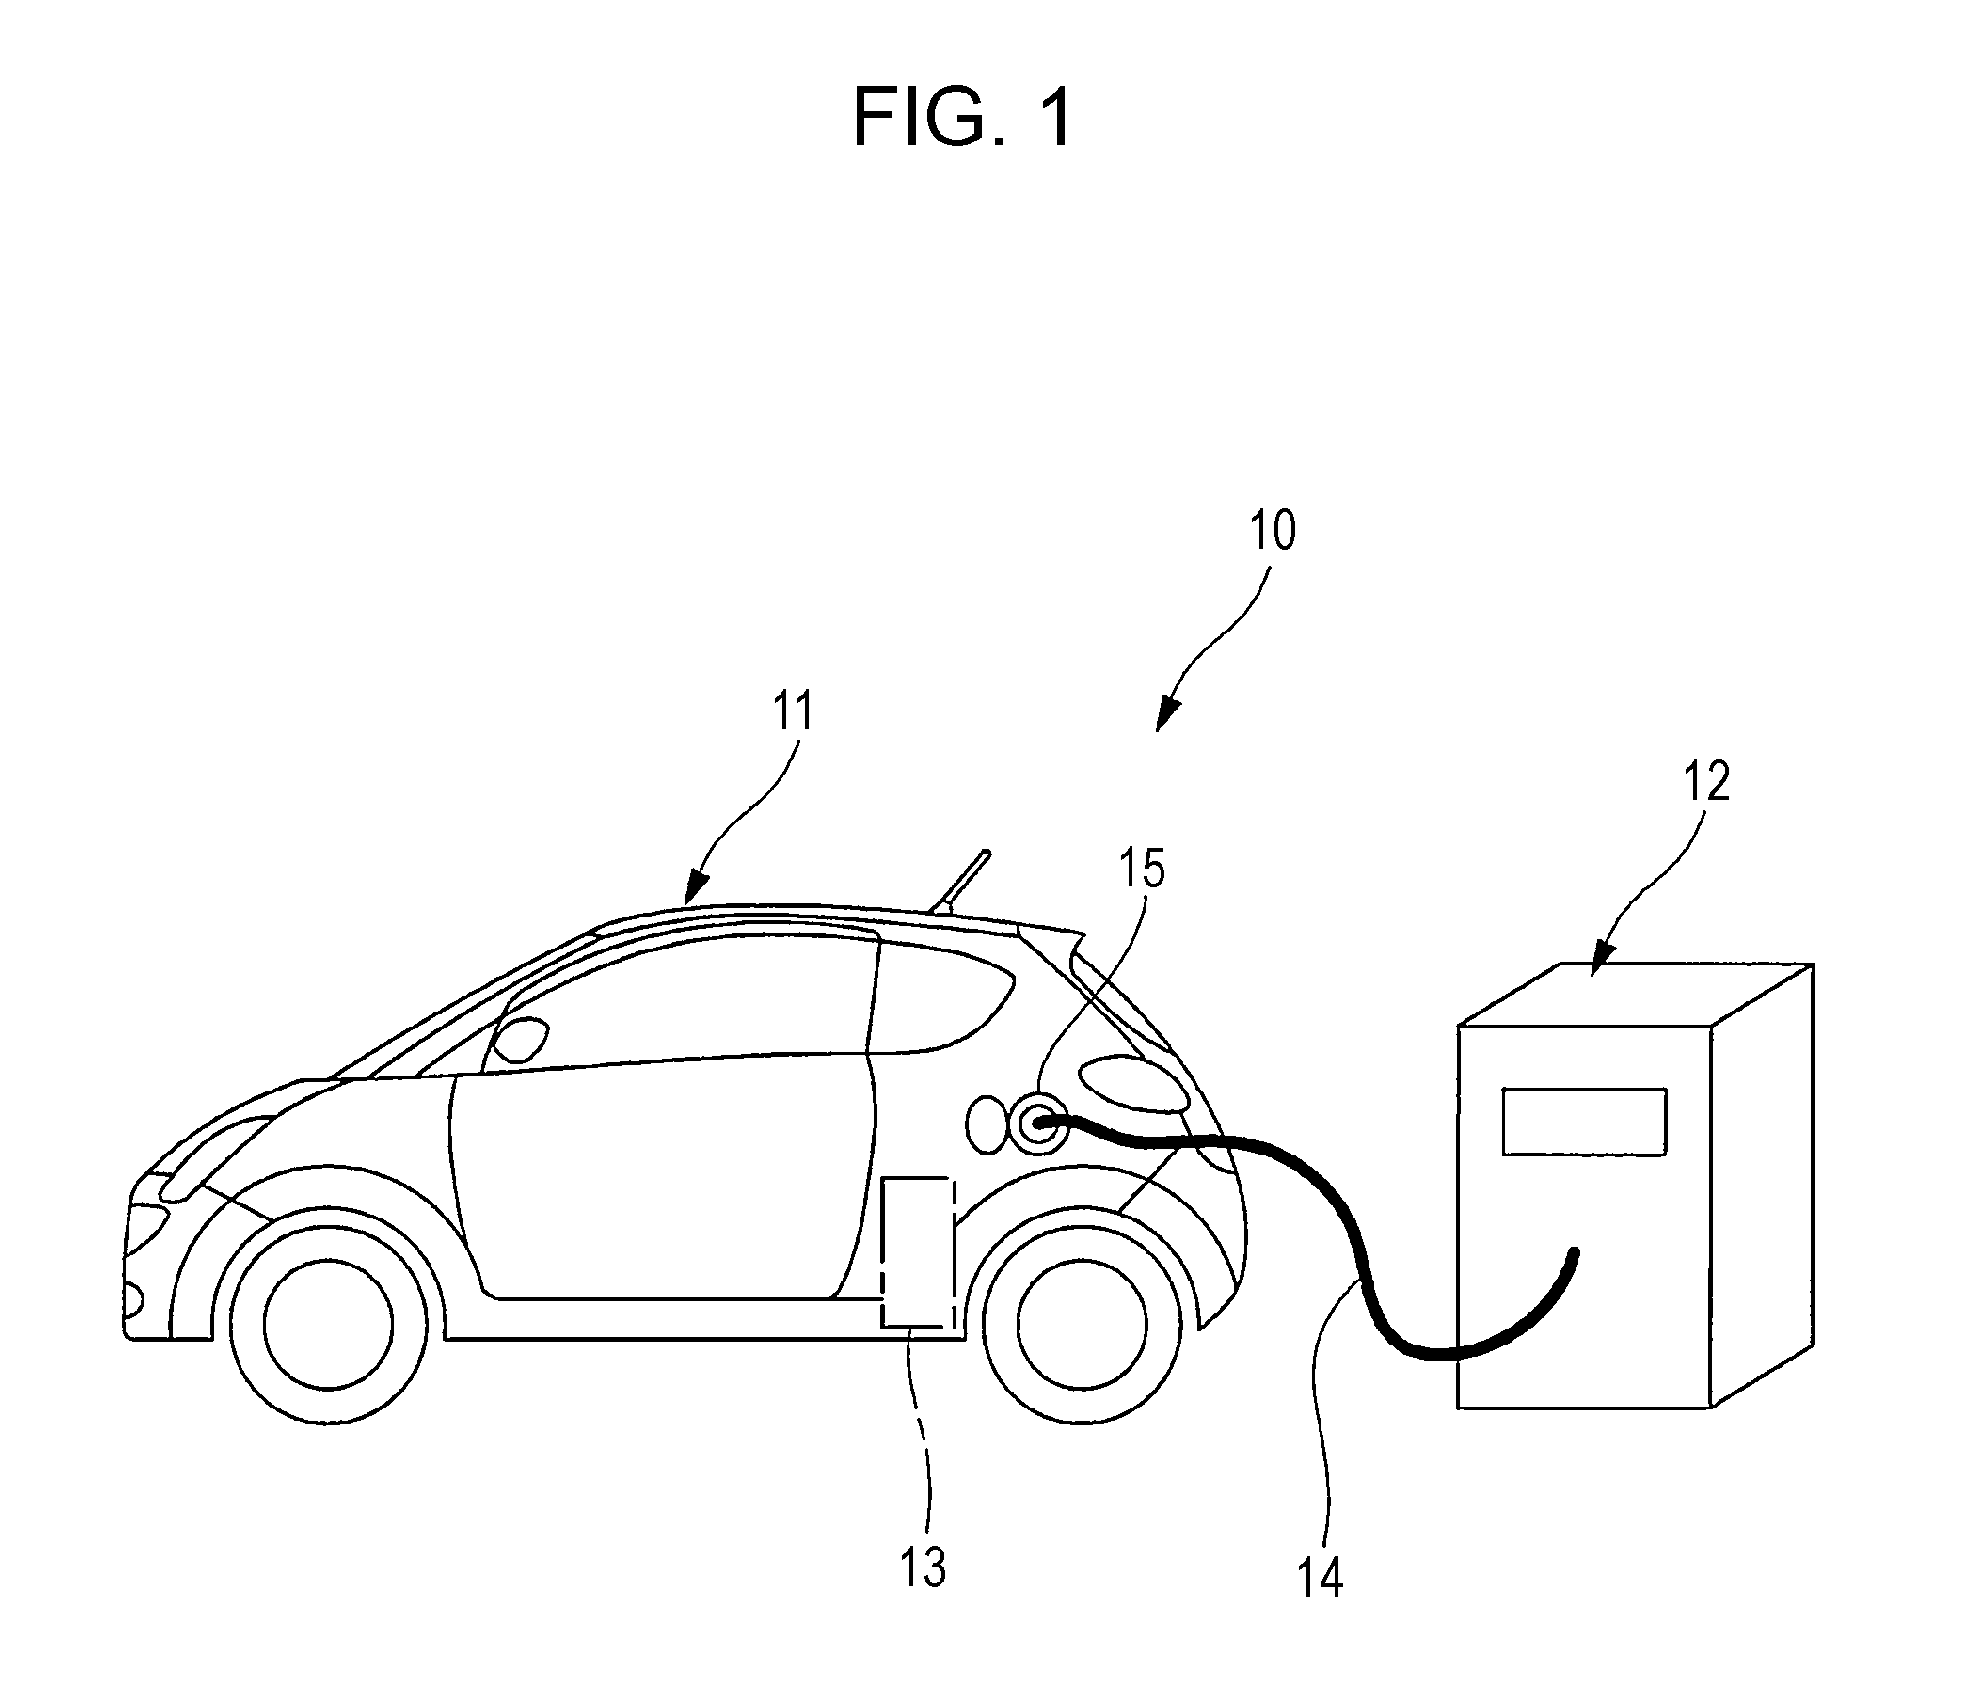 Electric charging system